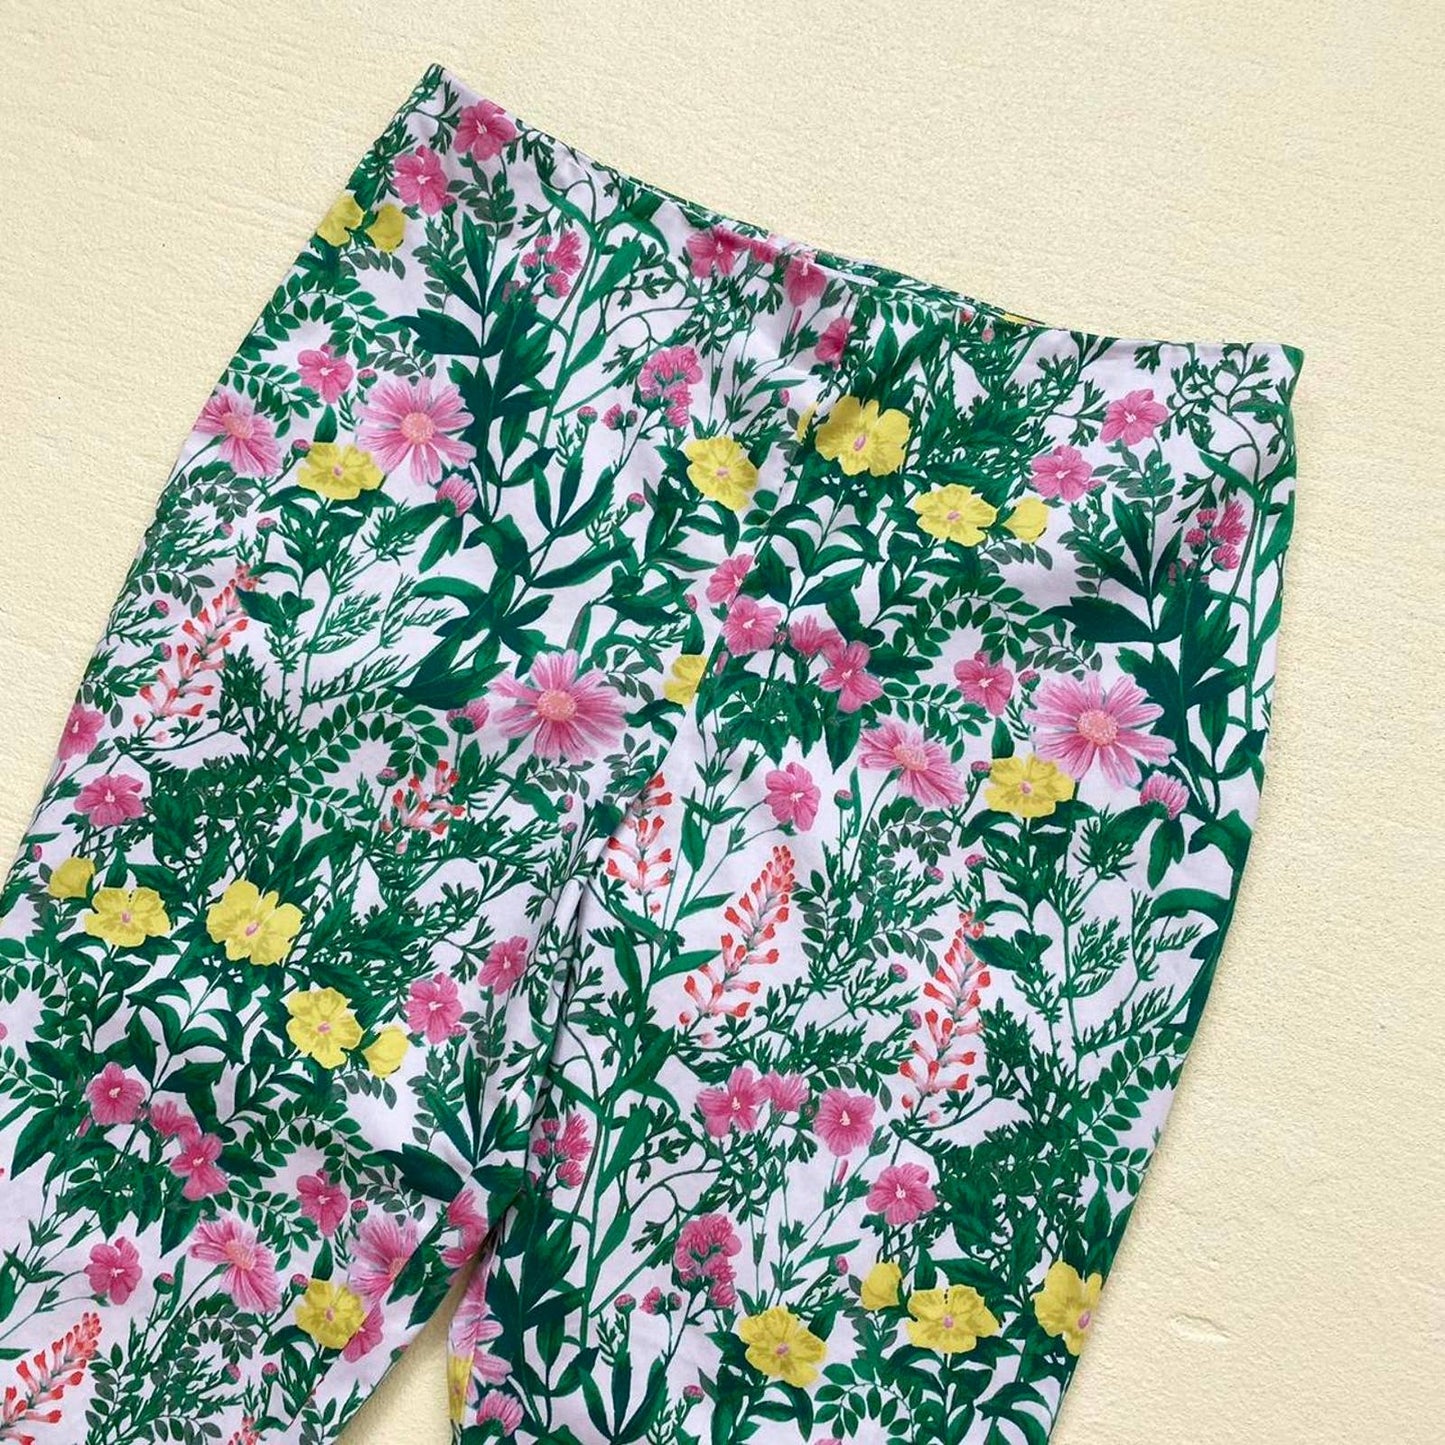 Secondhand RSVP by Talbots Slim Ankle Pant - Garden Print, Size 10P